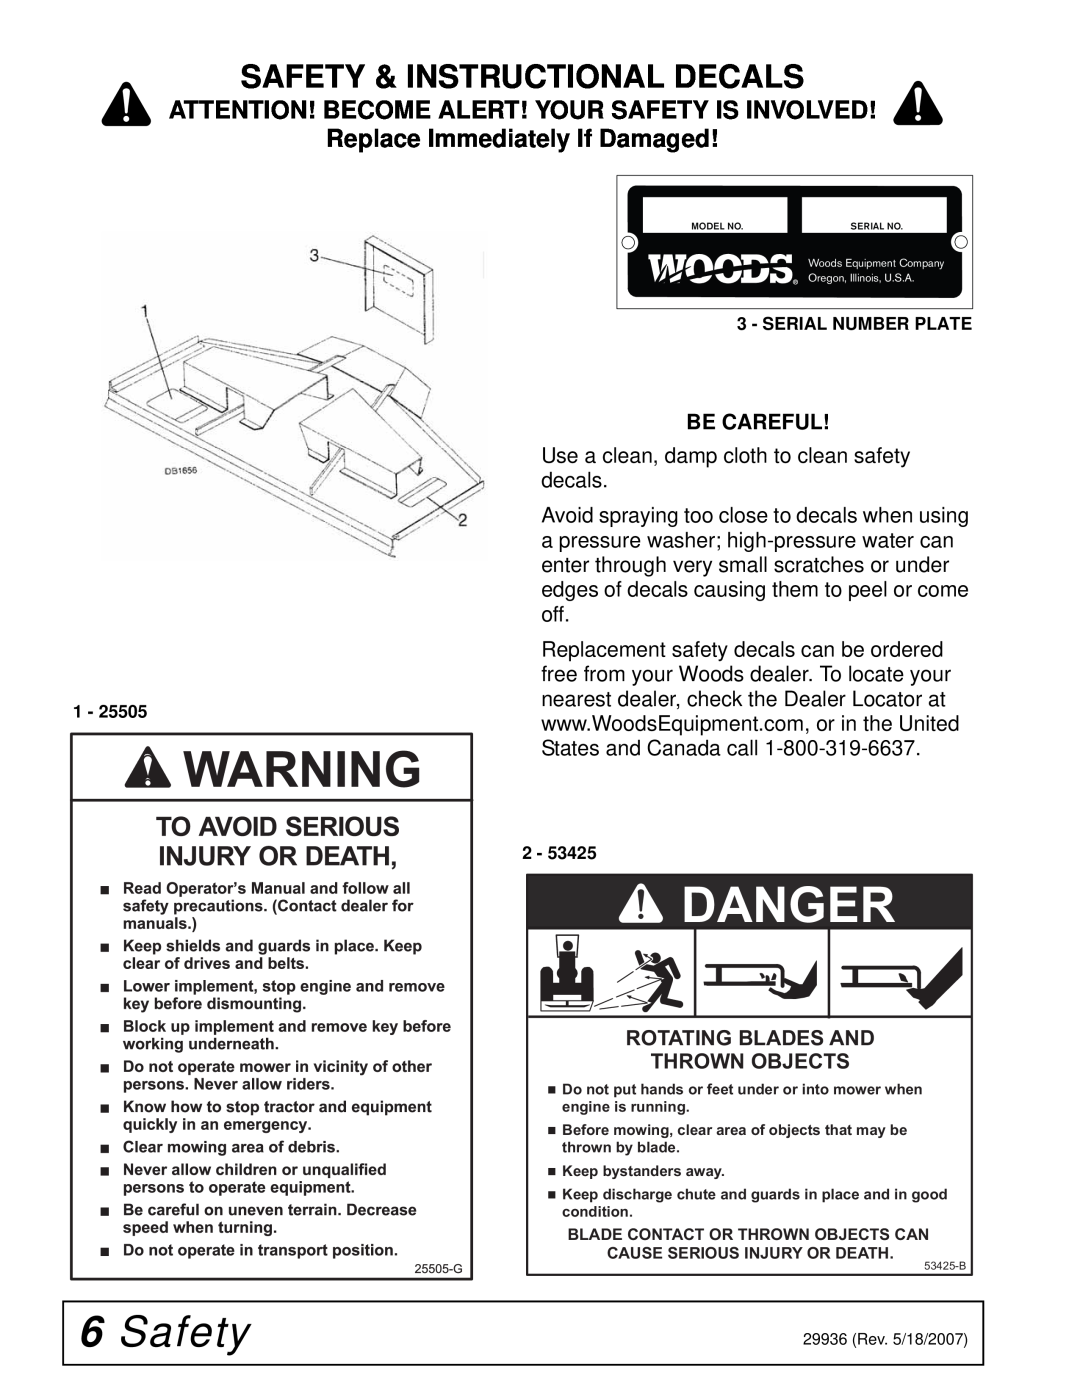 Woods Equipment L36, L59 Safety & Instructional Decals, Replace Immediately If Damaged, Be Careful, Danger, 53425-B 